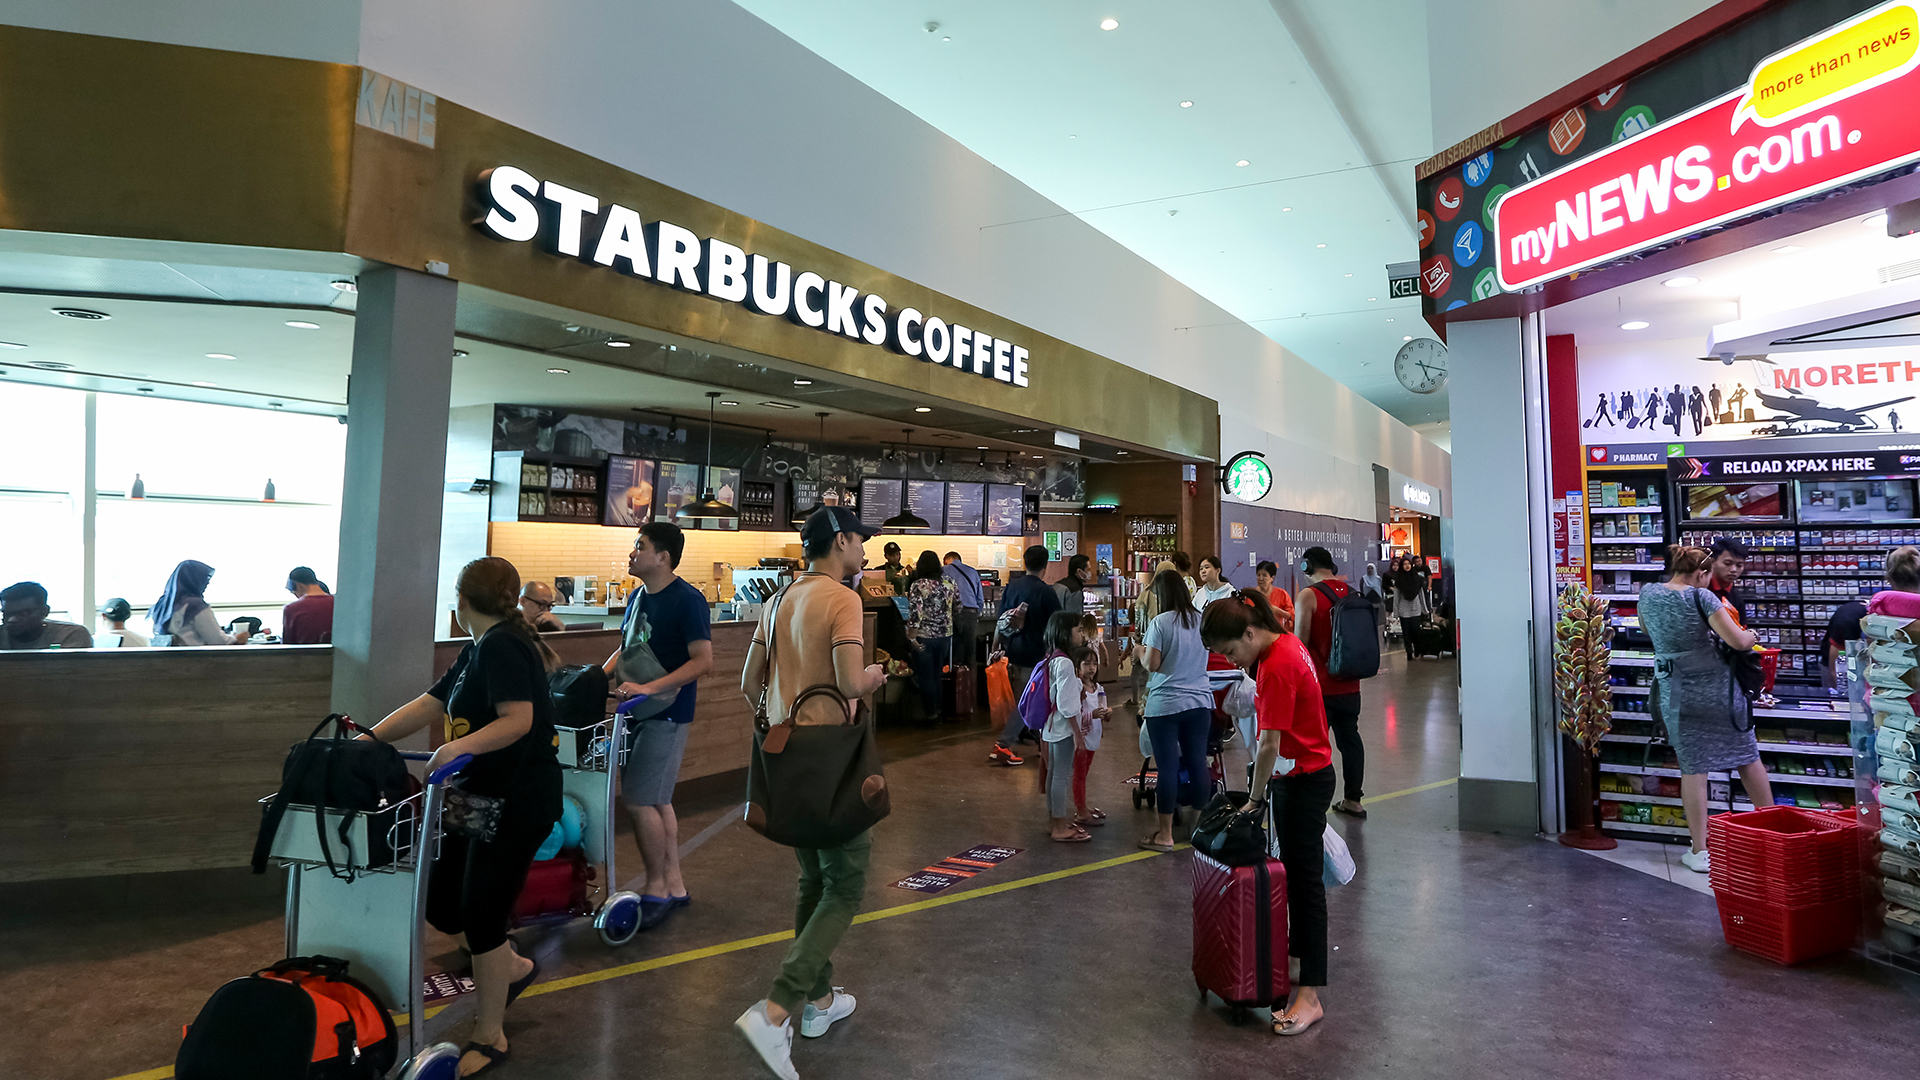 Delta Airlines miles could be your next Starbucks order